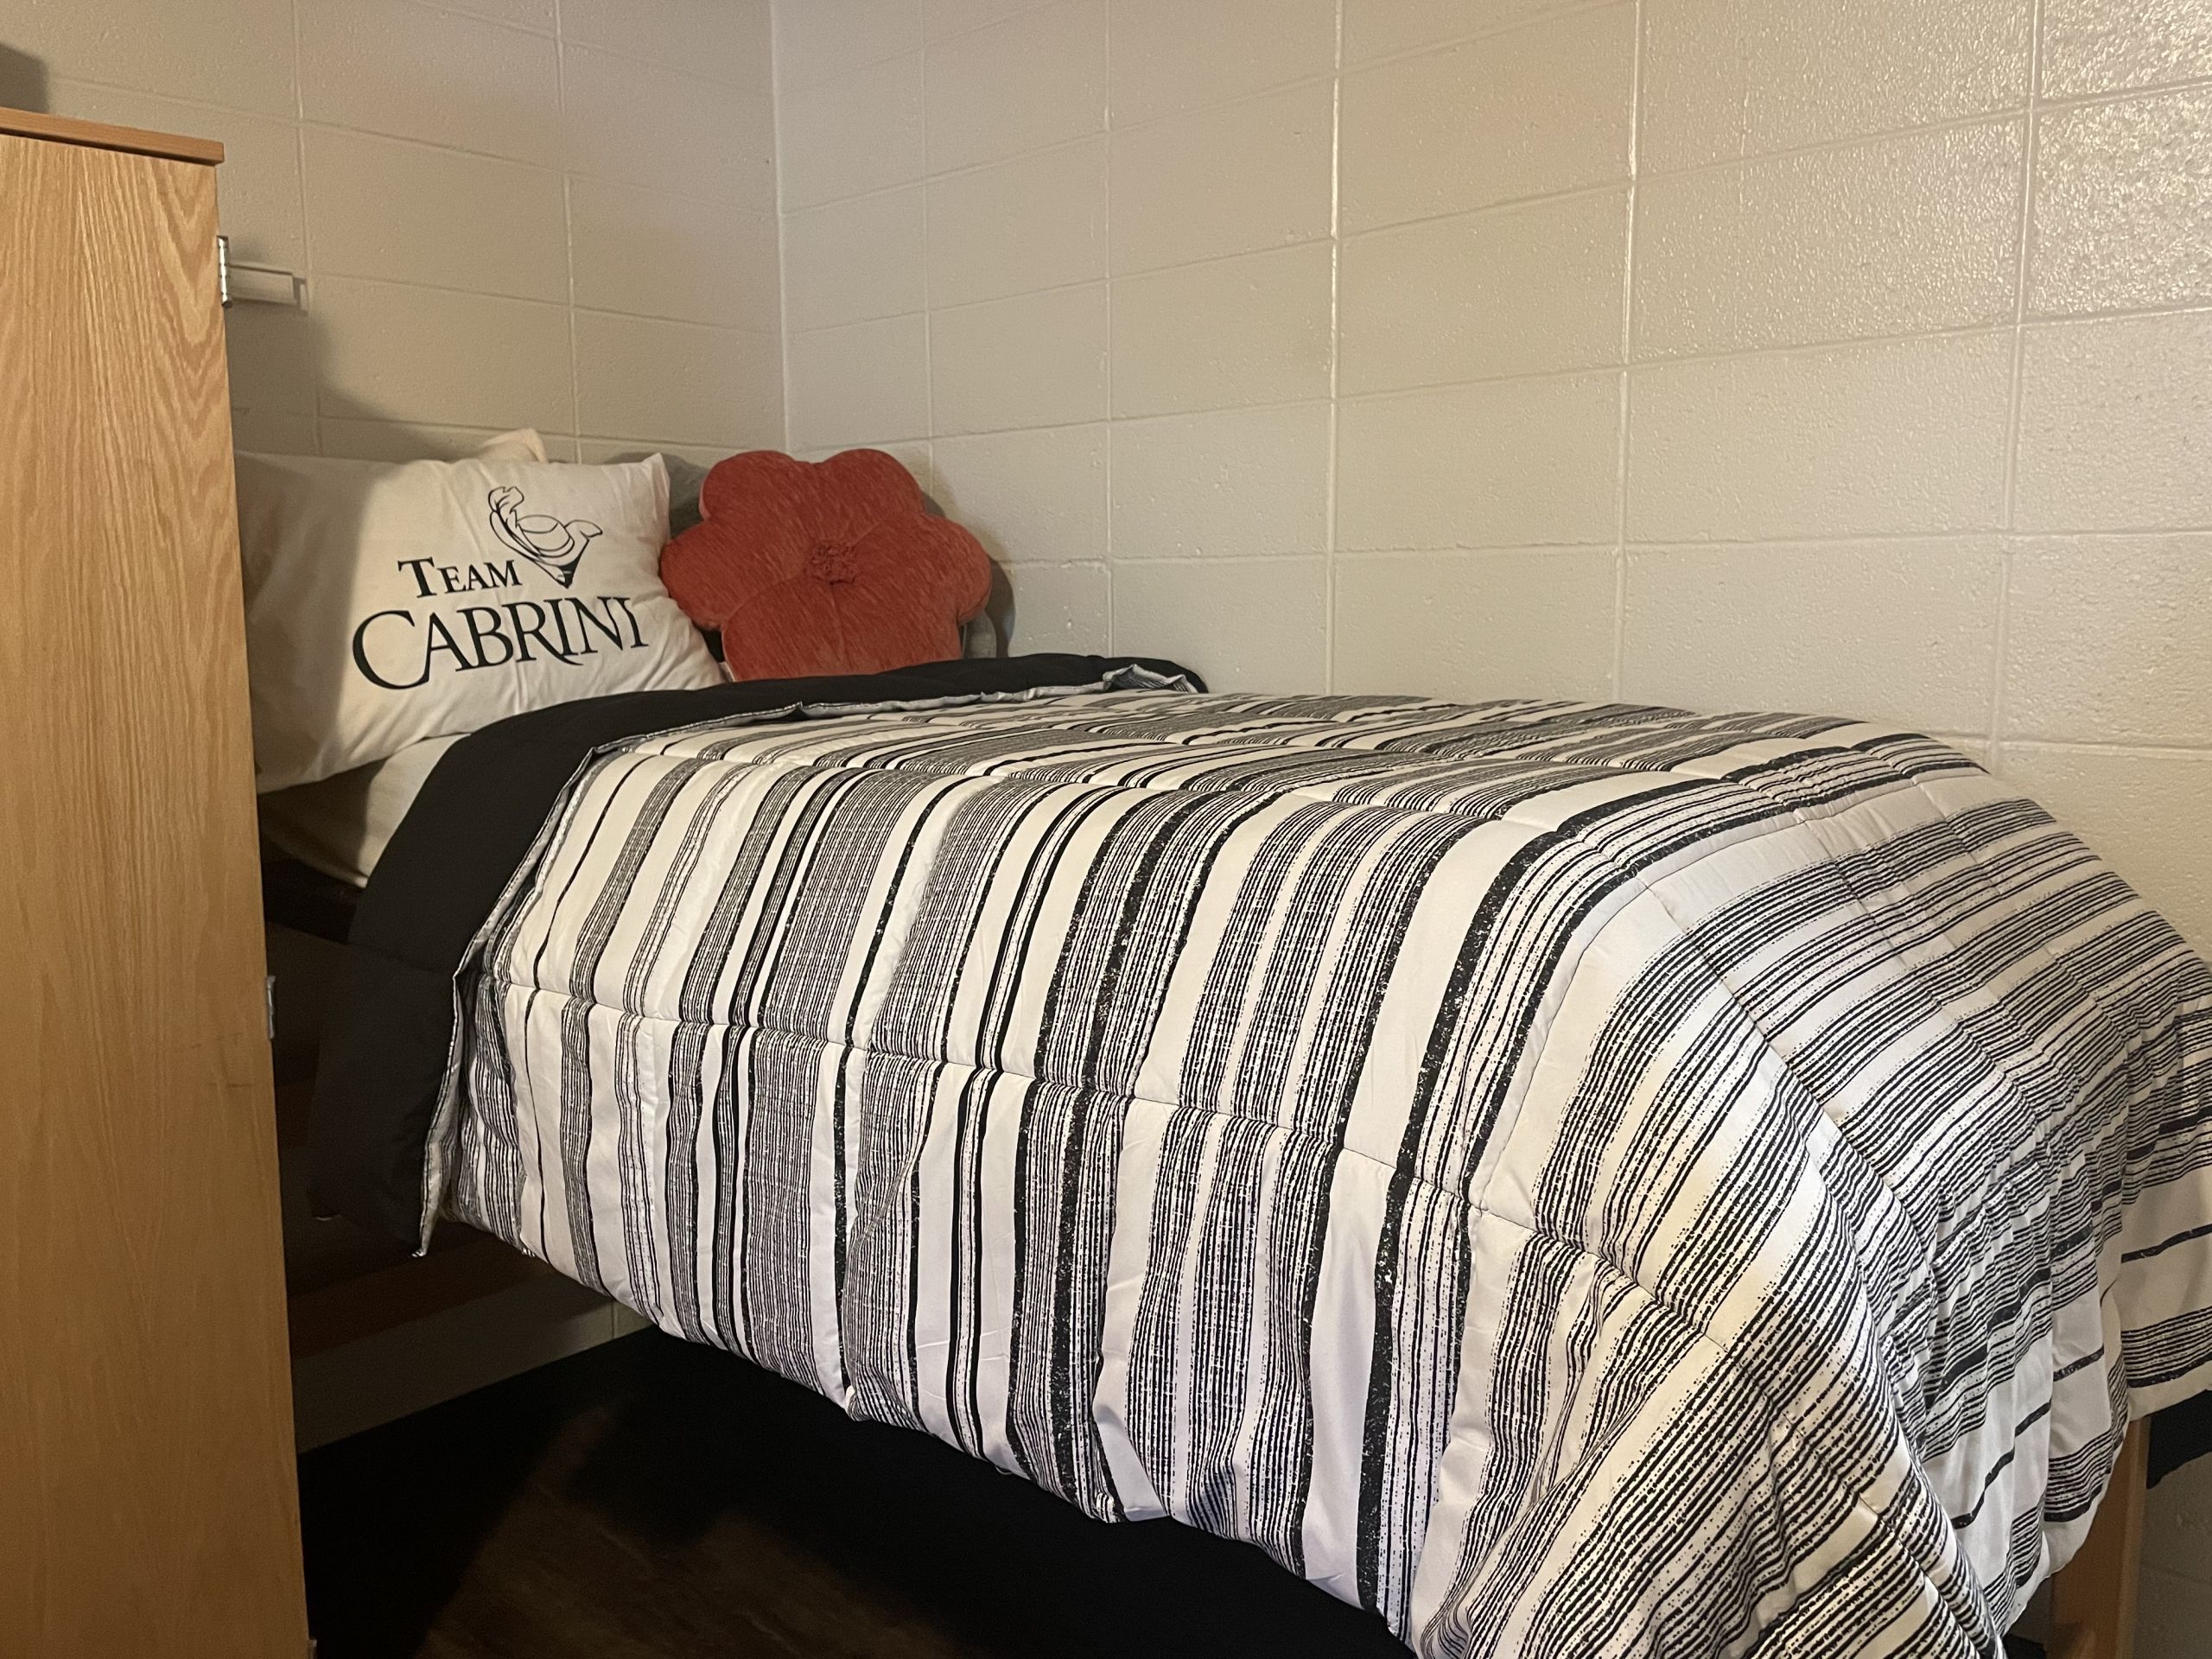 An example dorm bed in Woodcrest Hall. Photo by Brianna Mack.